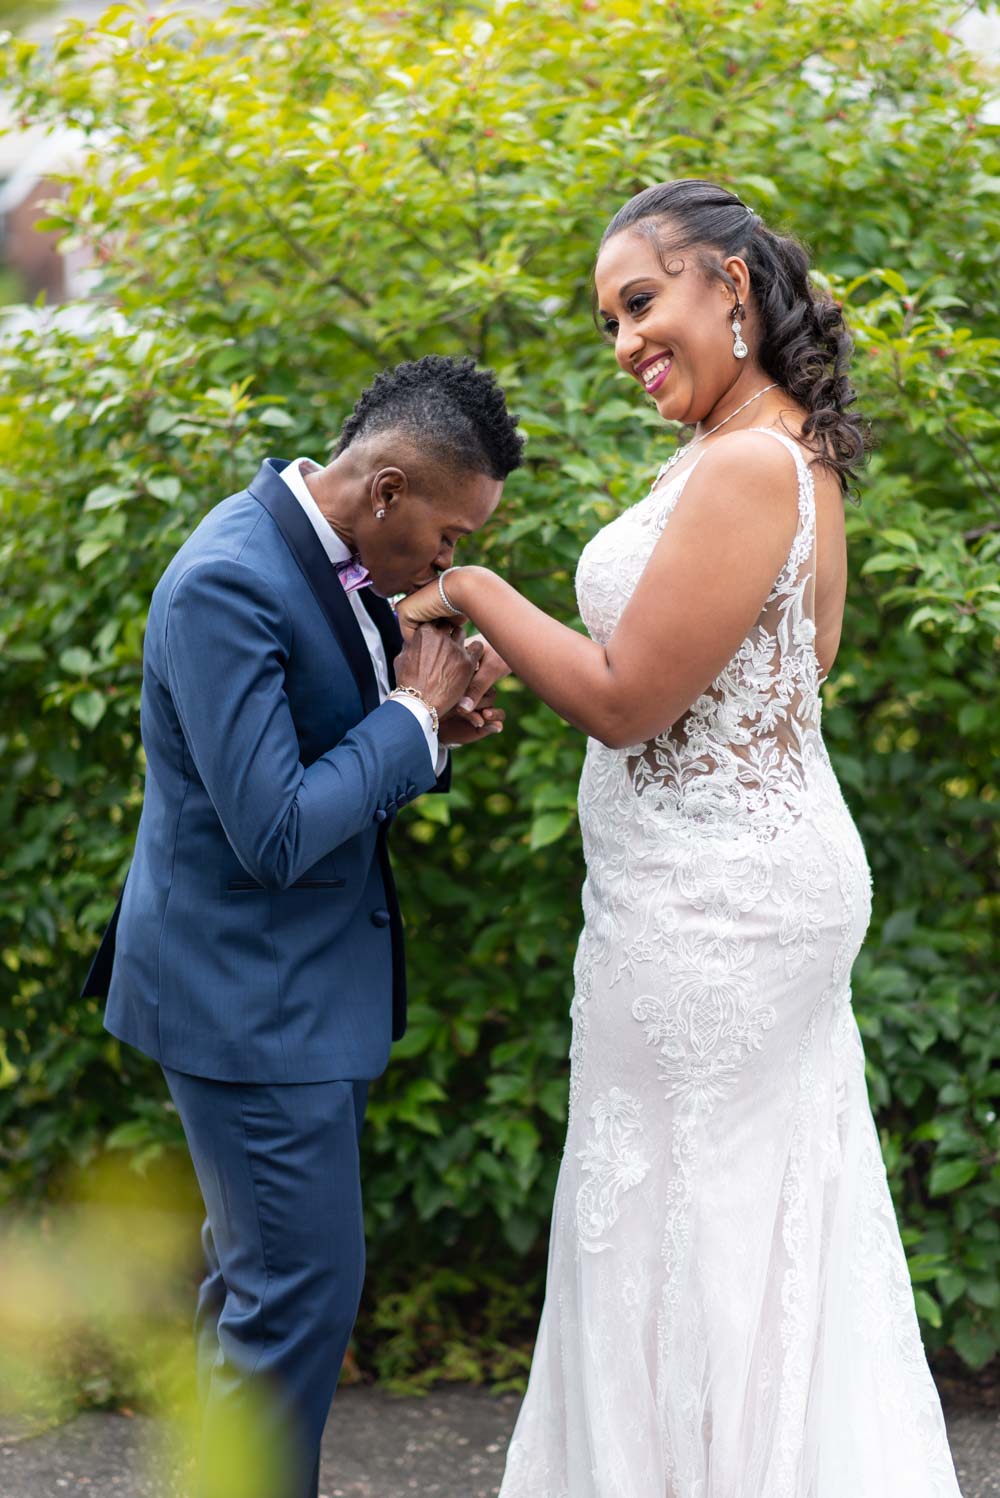 Nicole + Andrea: New Jersey wedding with Caribbean roots (the first look photos are the sweetest!)